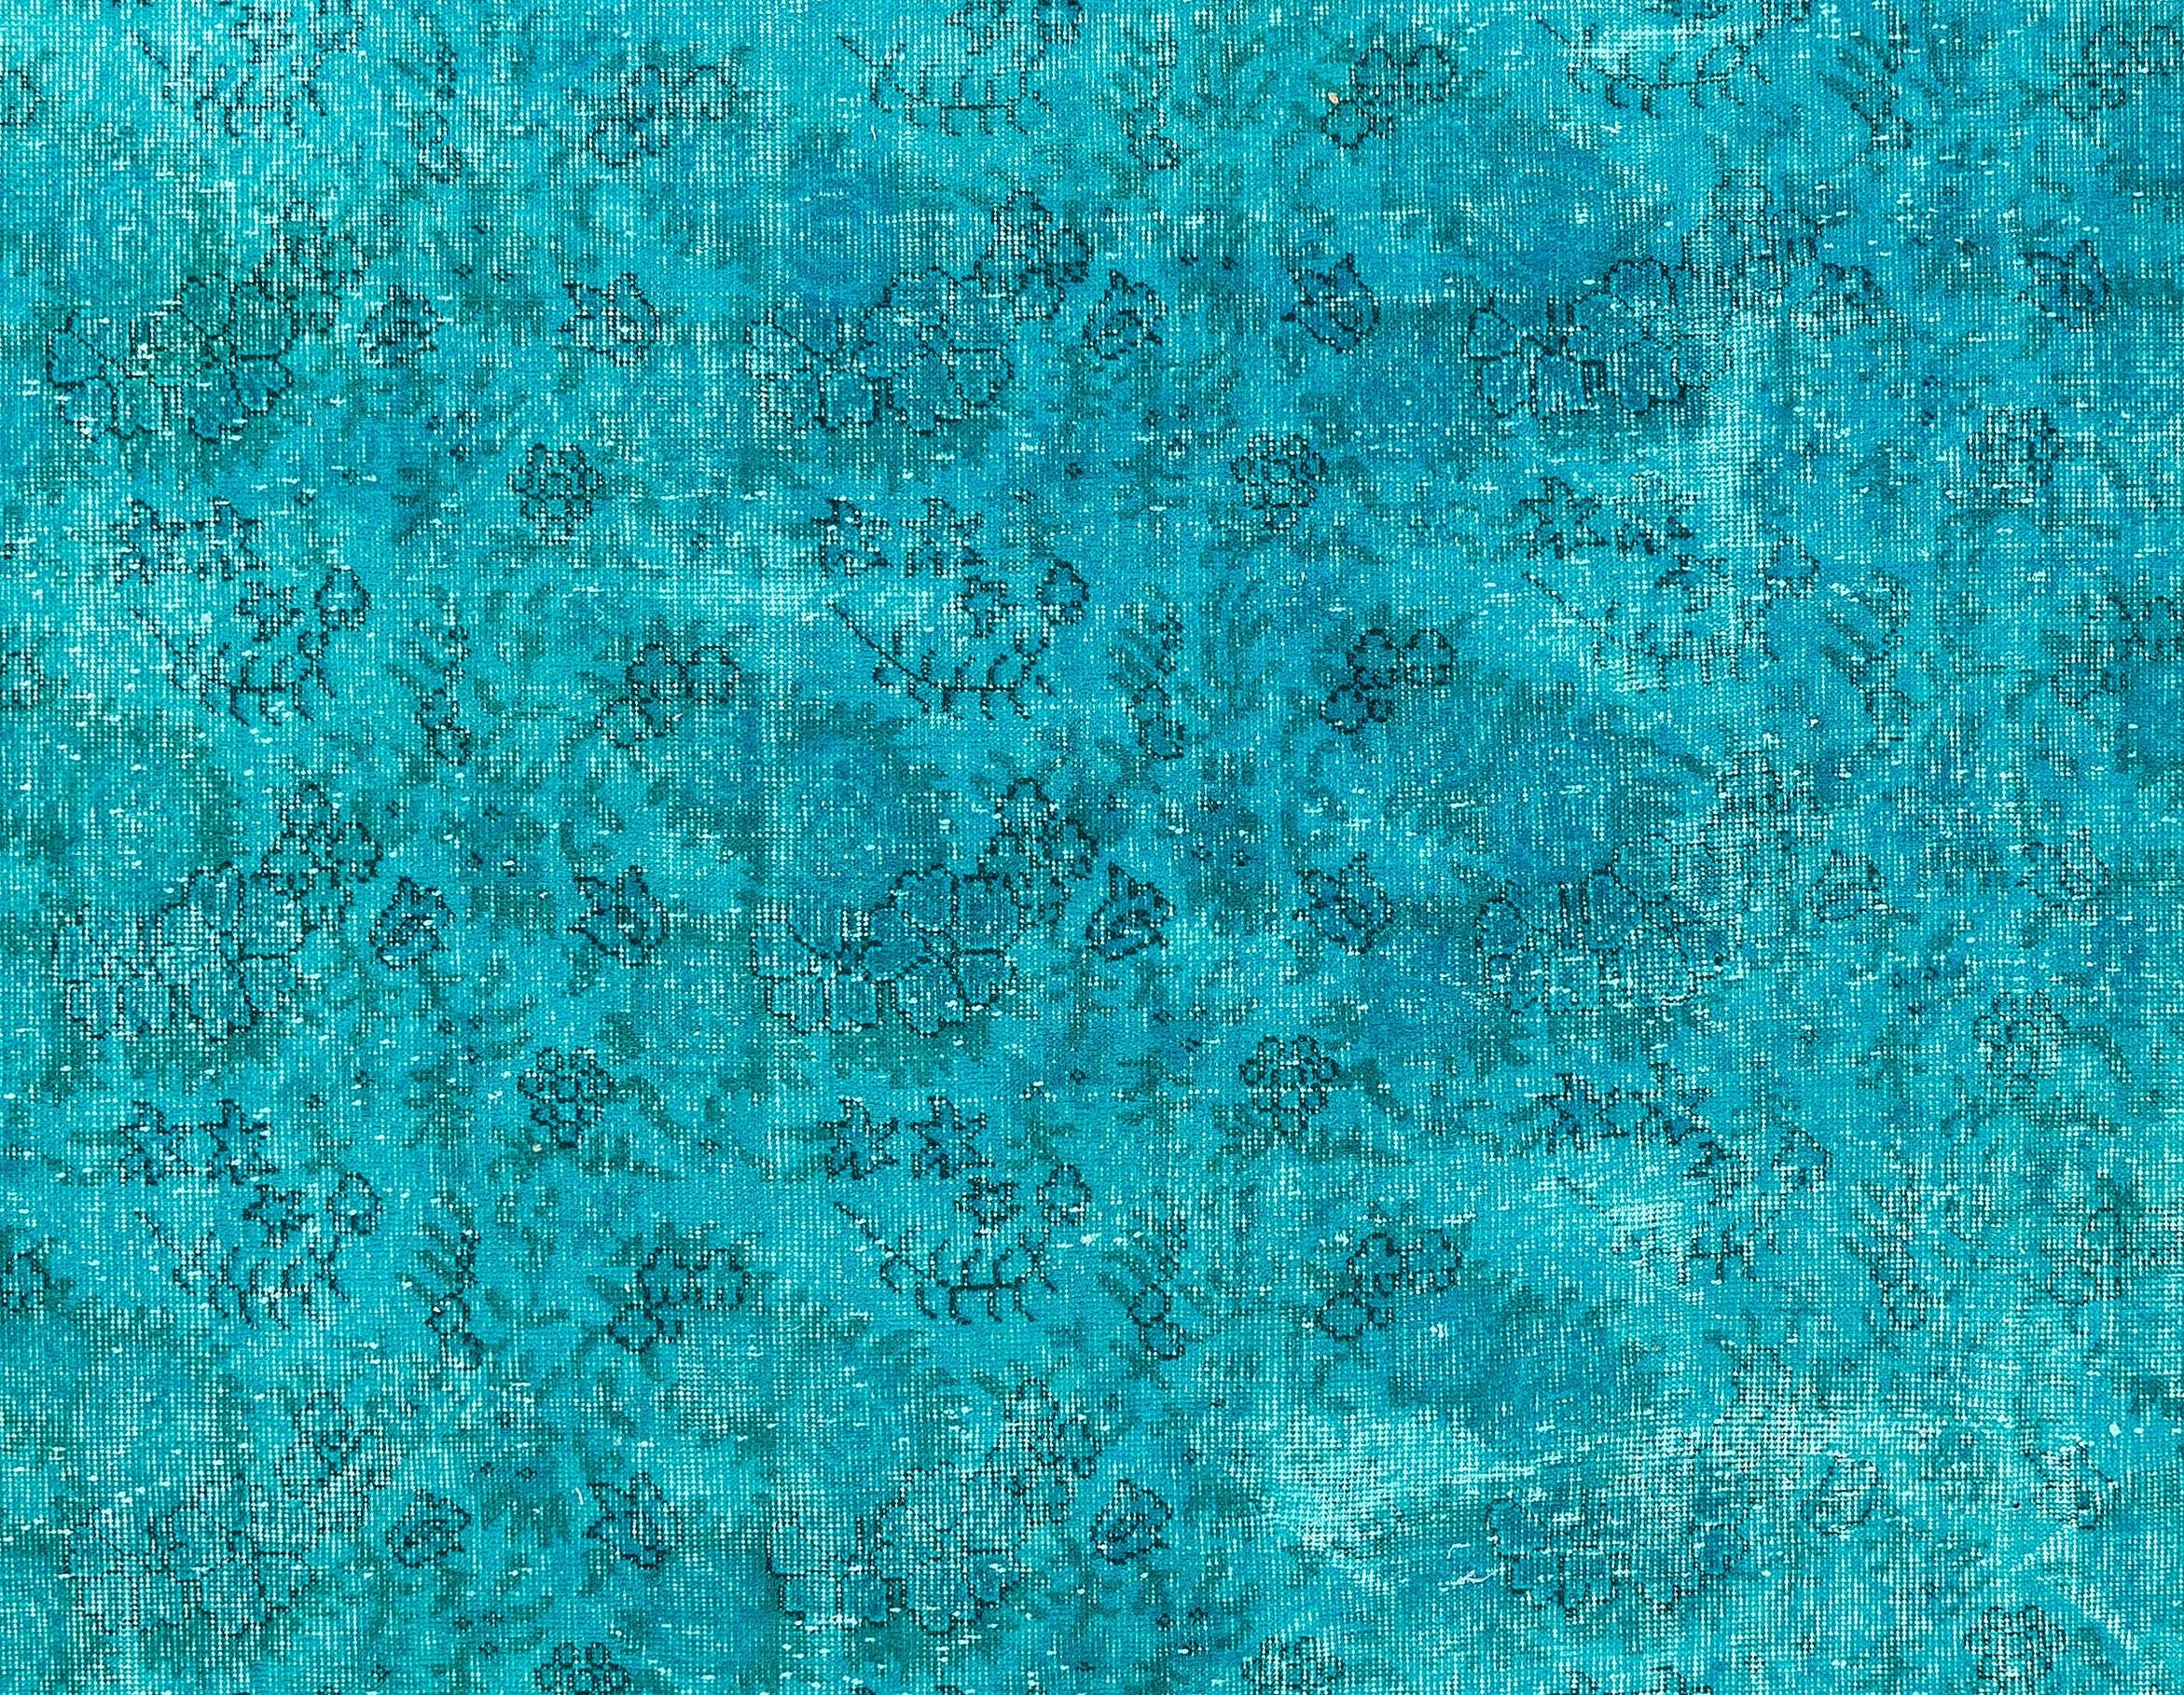 Hand-Woven  7.6x10.9 Ft Vintage Handmade Turkish Wool Area Rug Over-dyed in Teal Blue